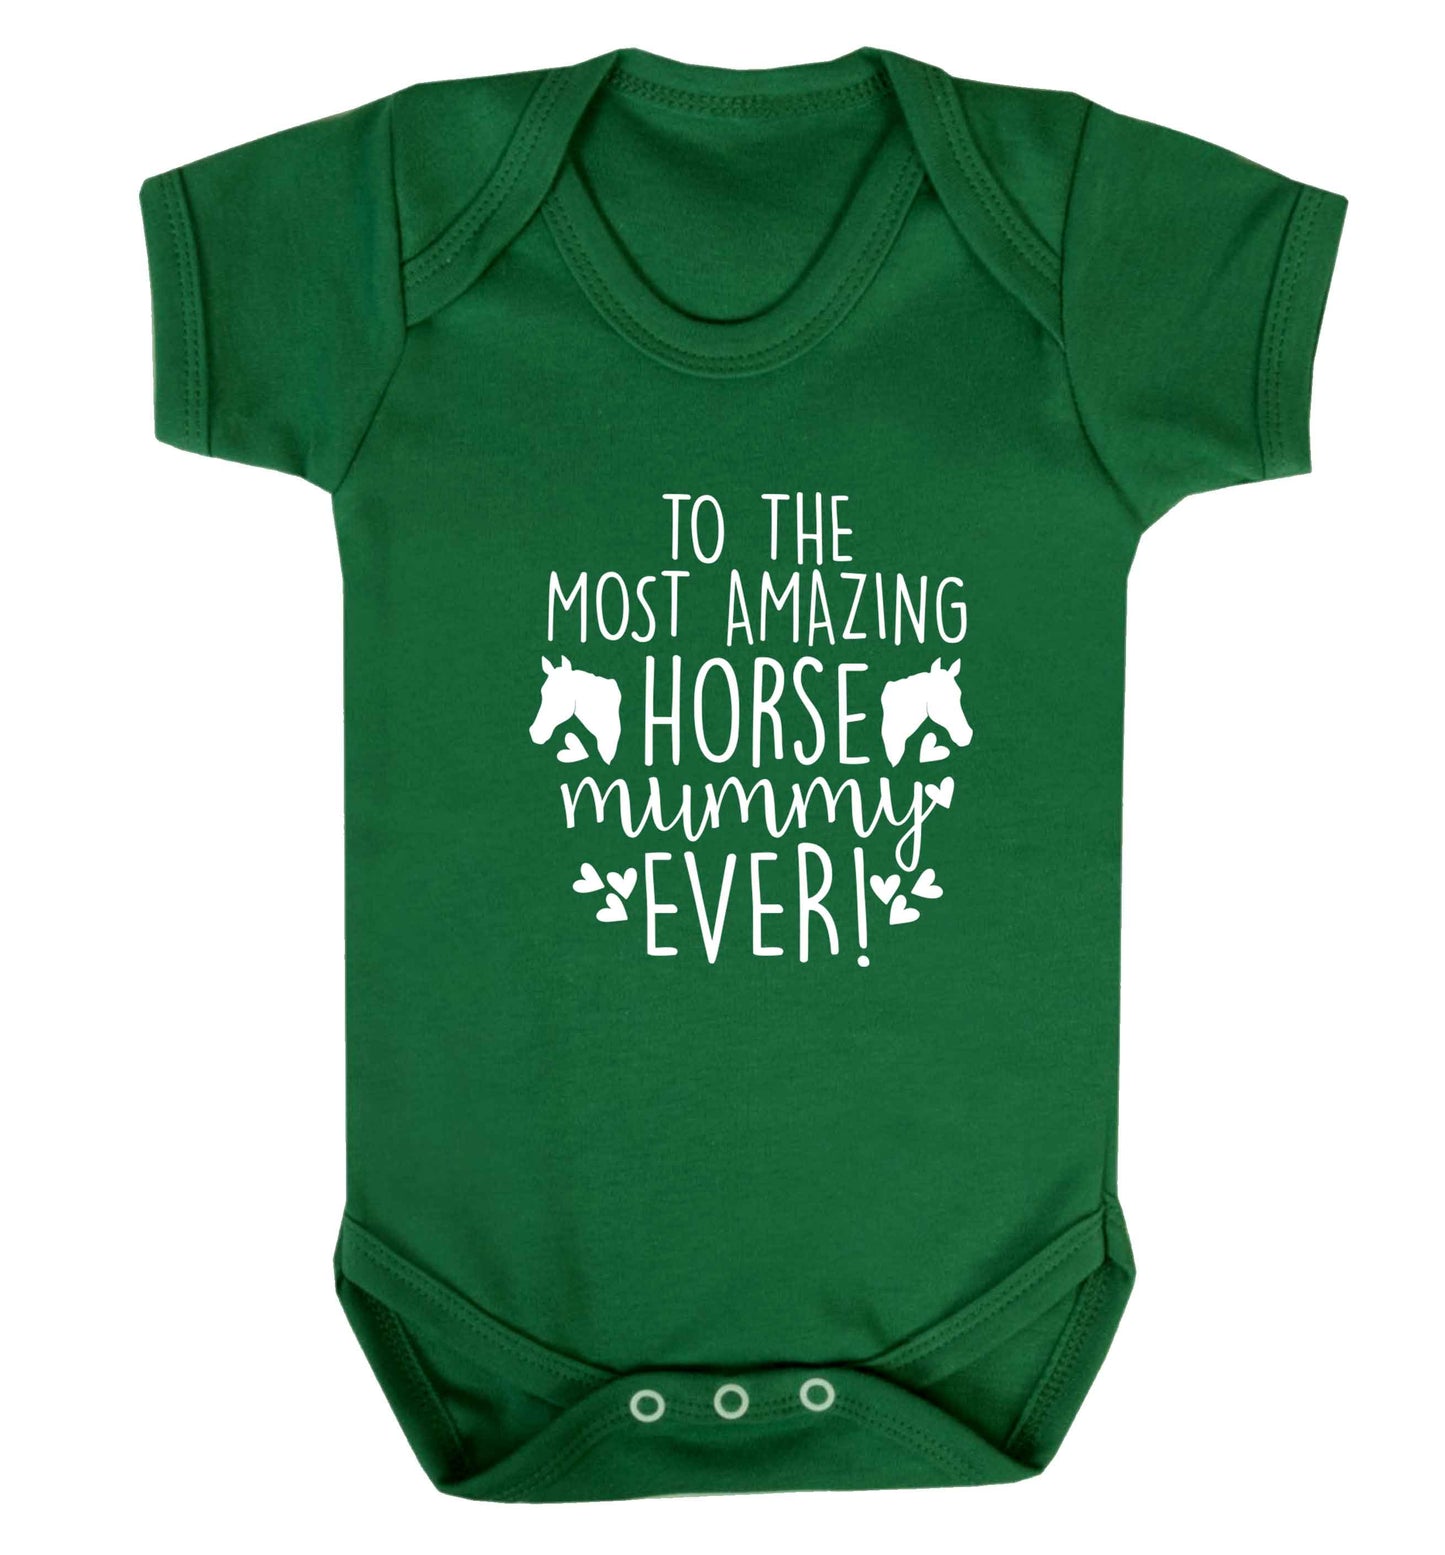 To the most amazing horse mummy ever! baby vest green 18-24 months